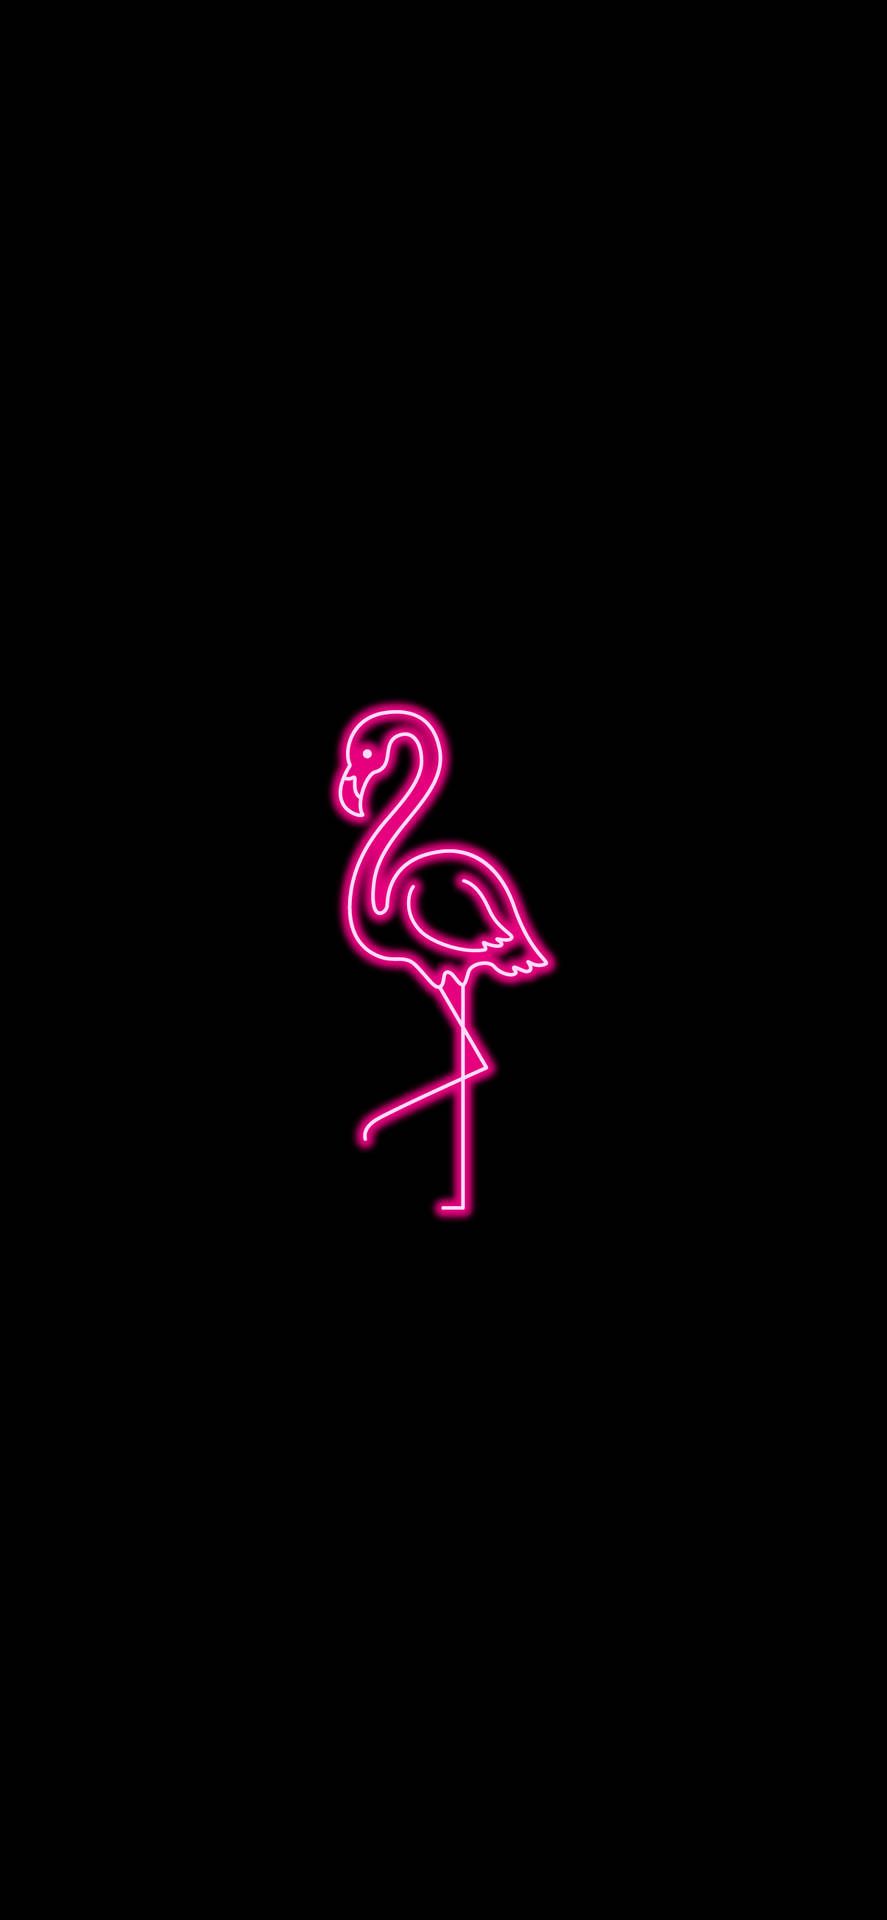 A pink neon flamingo on a black background - Neon pink, flamingo